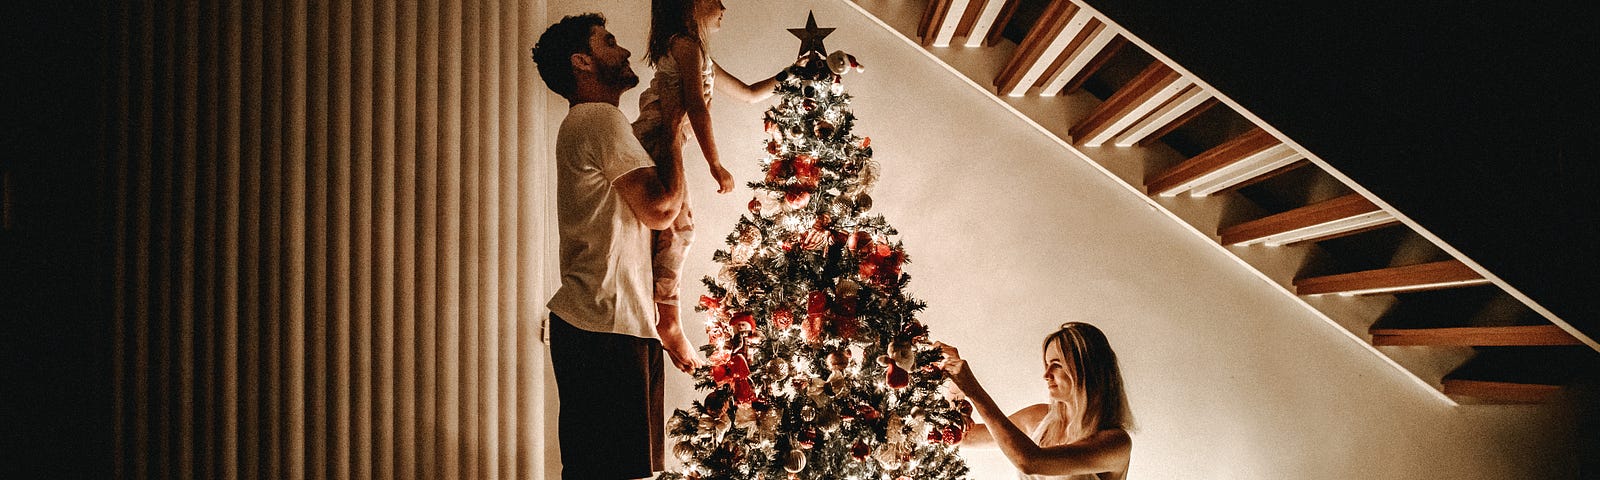 Father lifting child to put star on Christmas tree. Mother kneeling by tree.